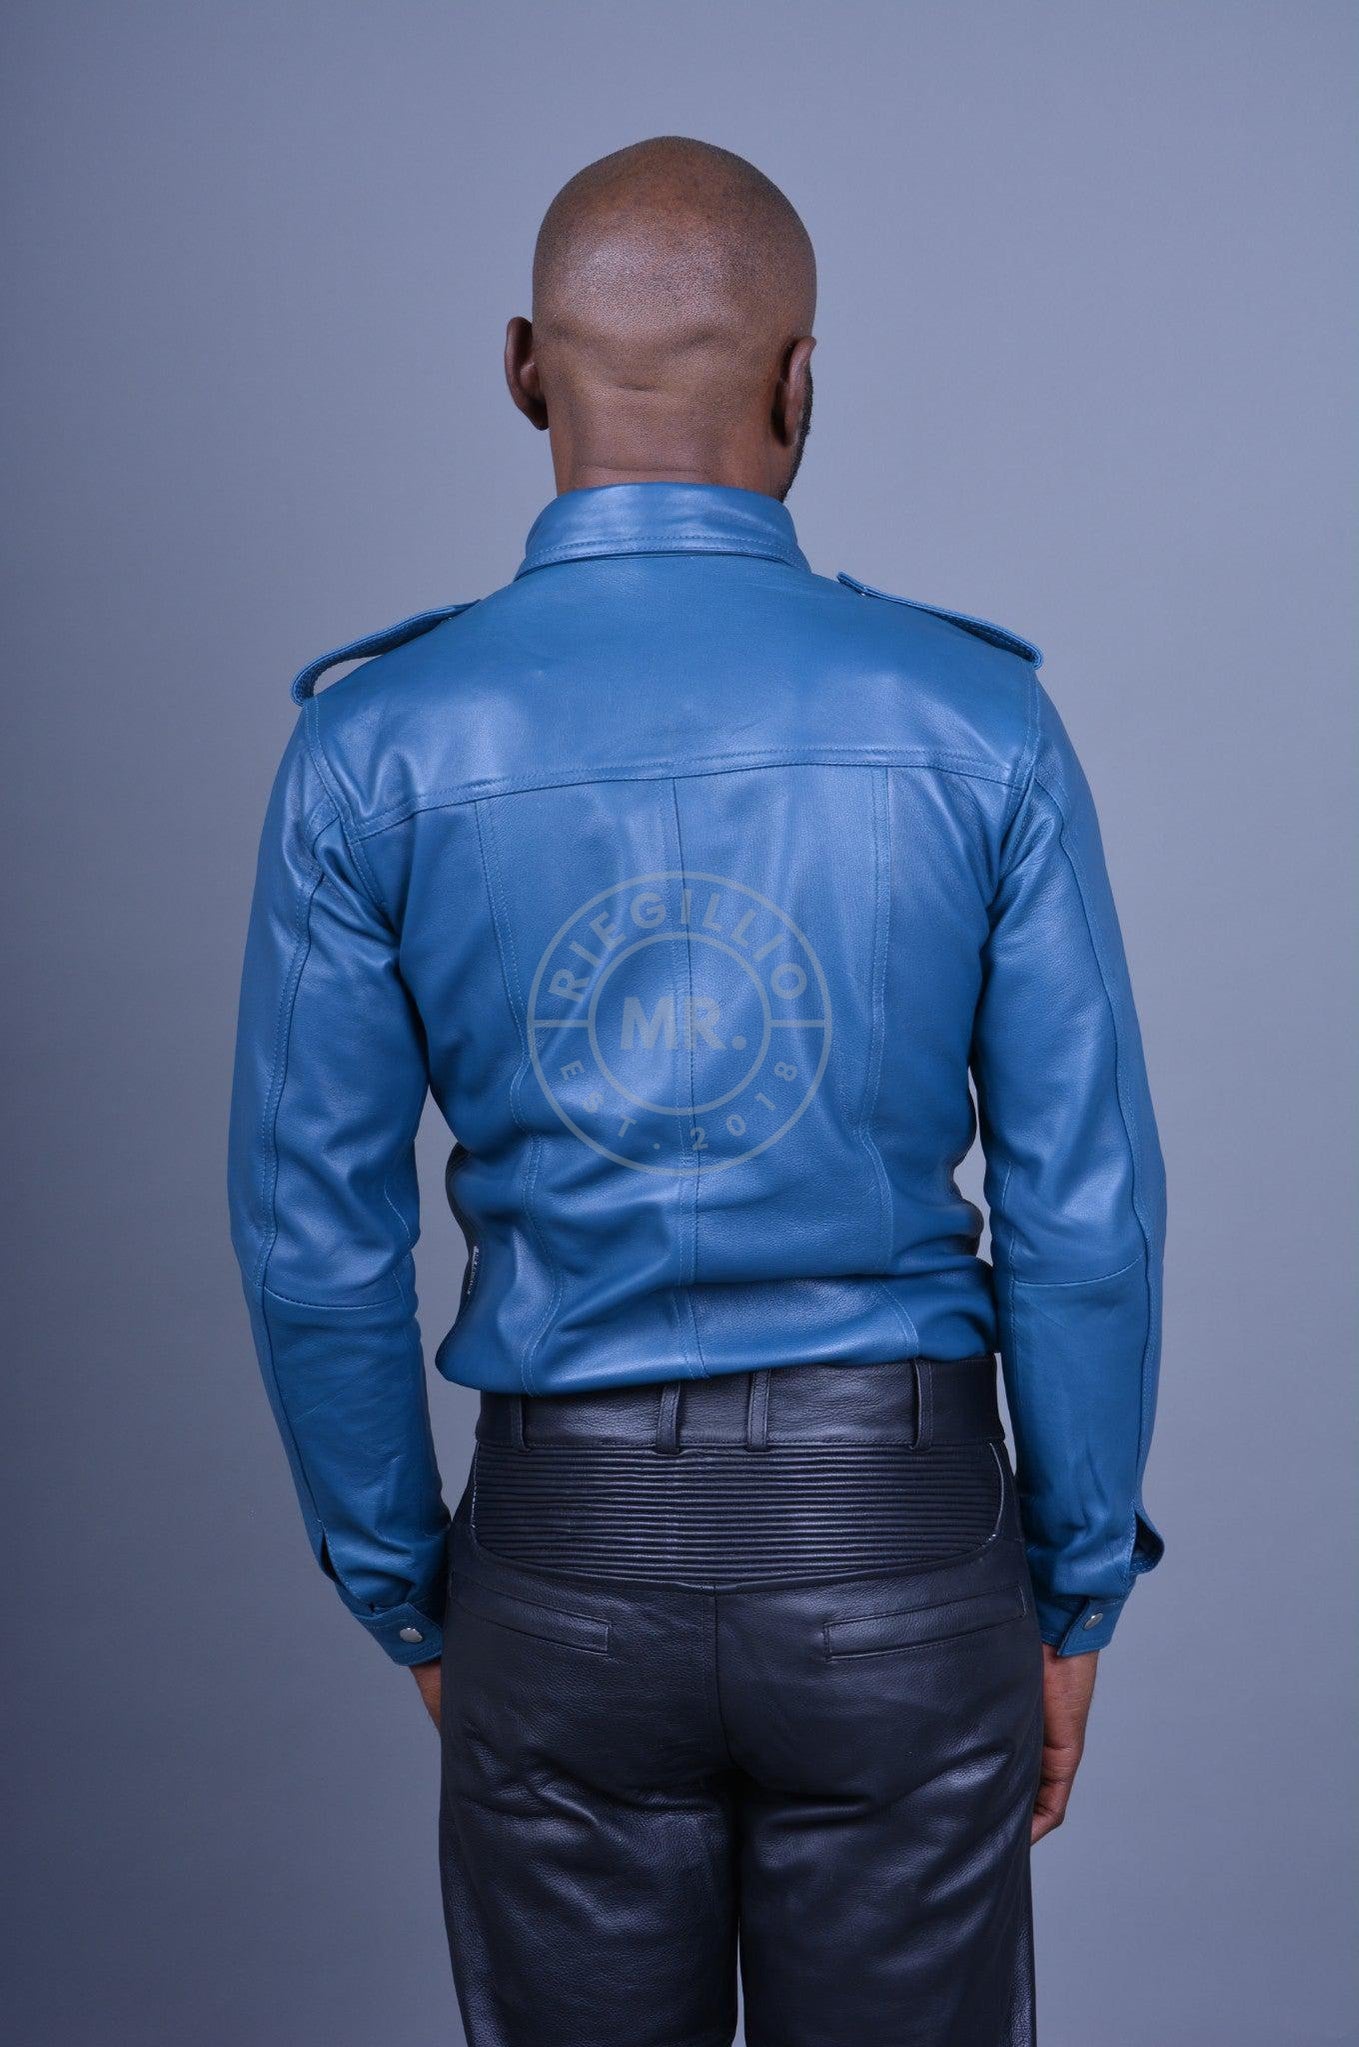 Jeans Blue Leather Shirt Long Sleeves at MR. Riegillio